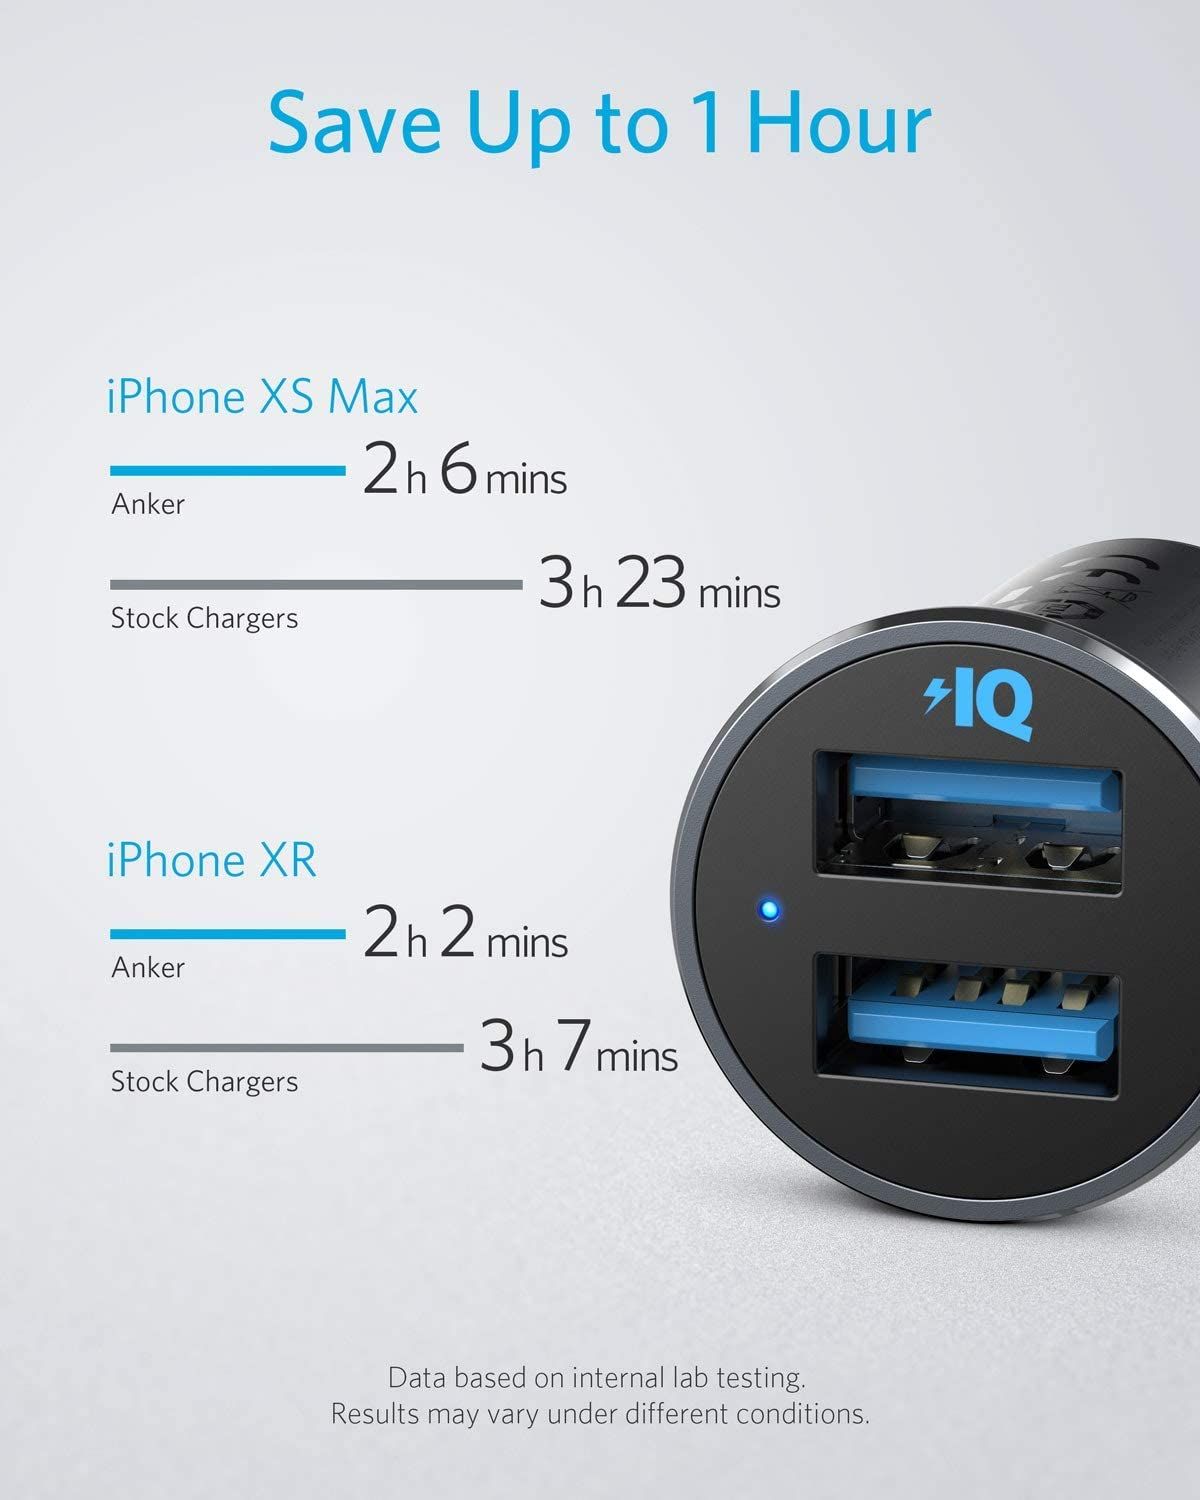 Anker Car Charger battery